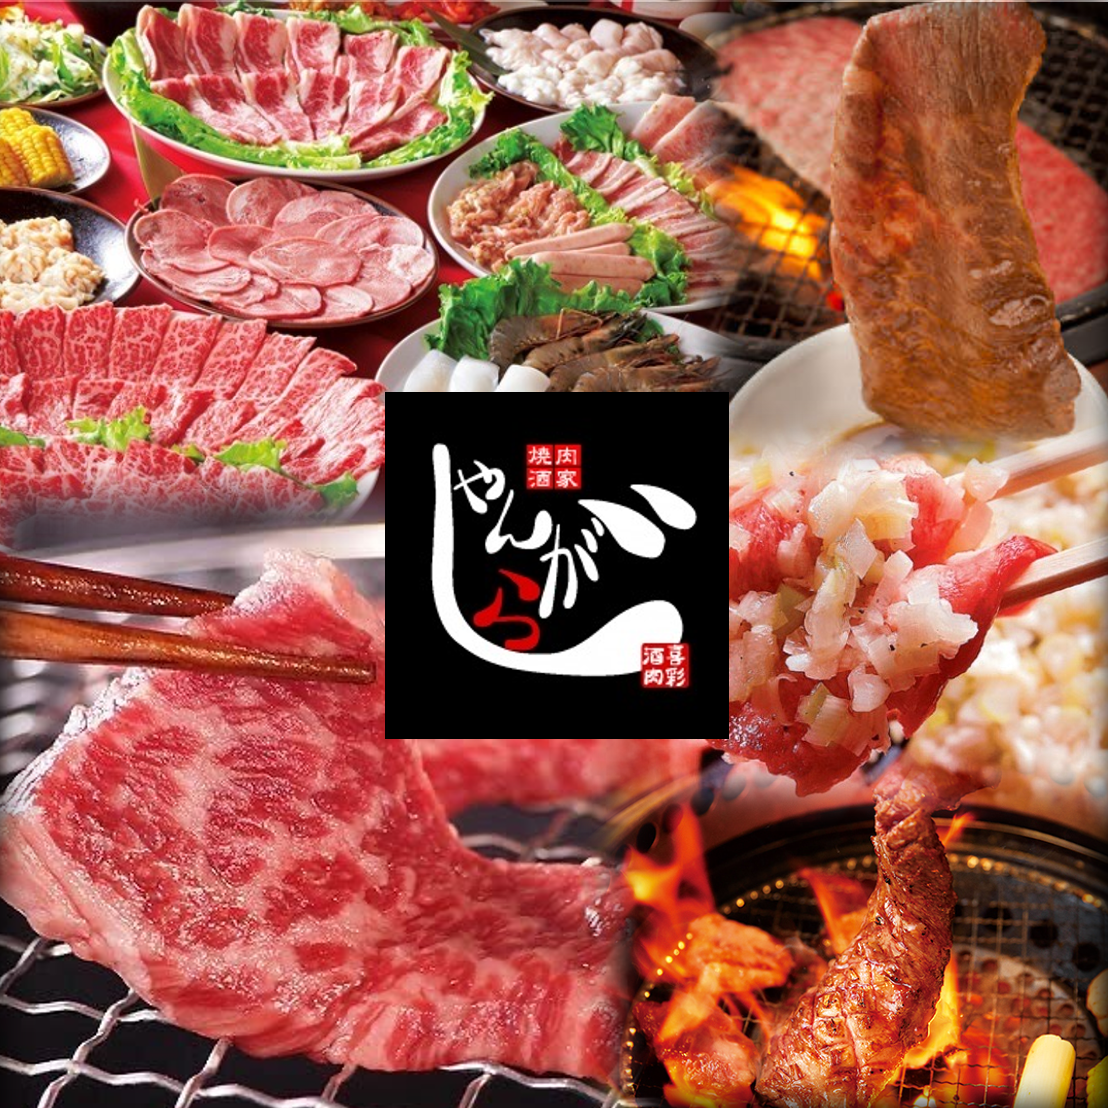 Excellent! All-you-can-eat aged meat ◎ All-you-can-eat high-quality luxury yakiniku ☆